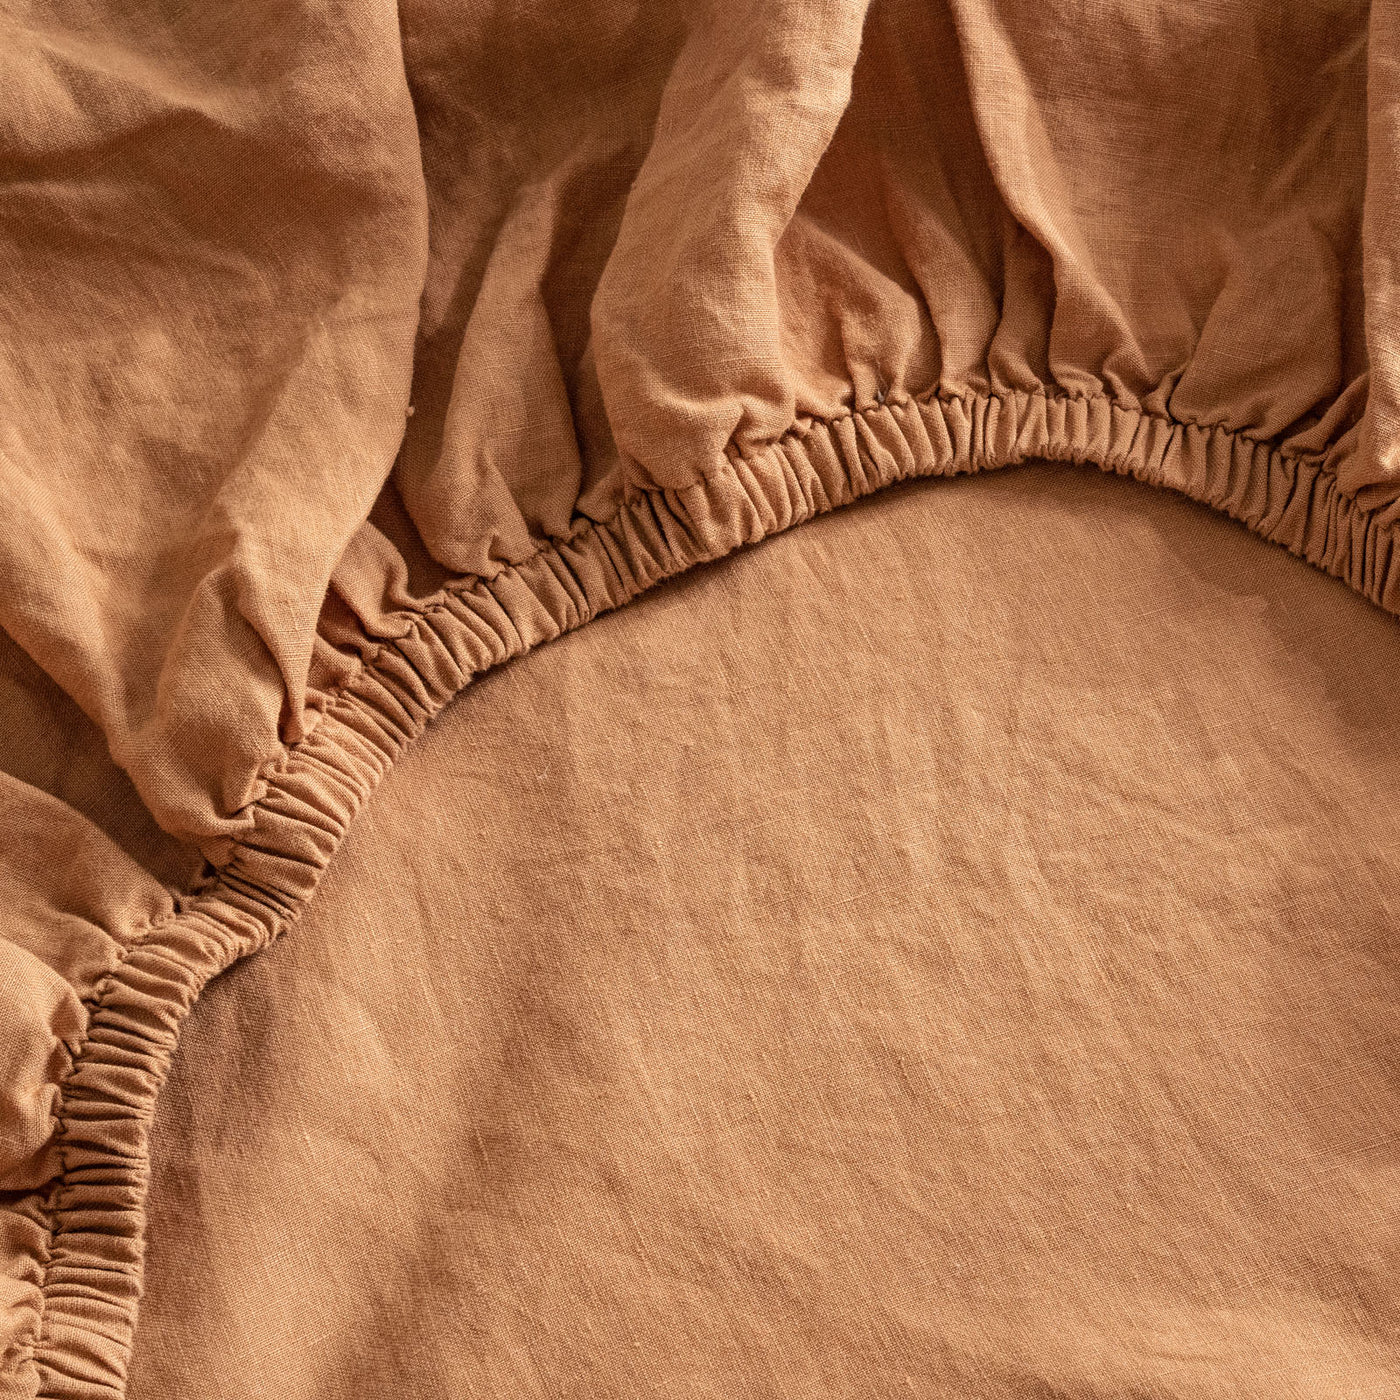 French Flax Linen Sheet Set in Sandalwood